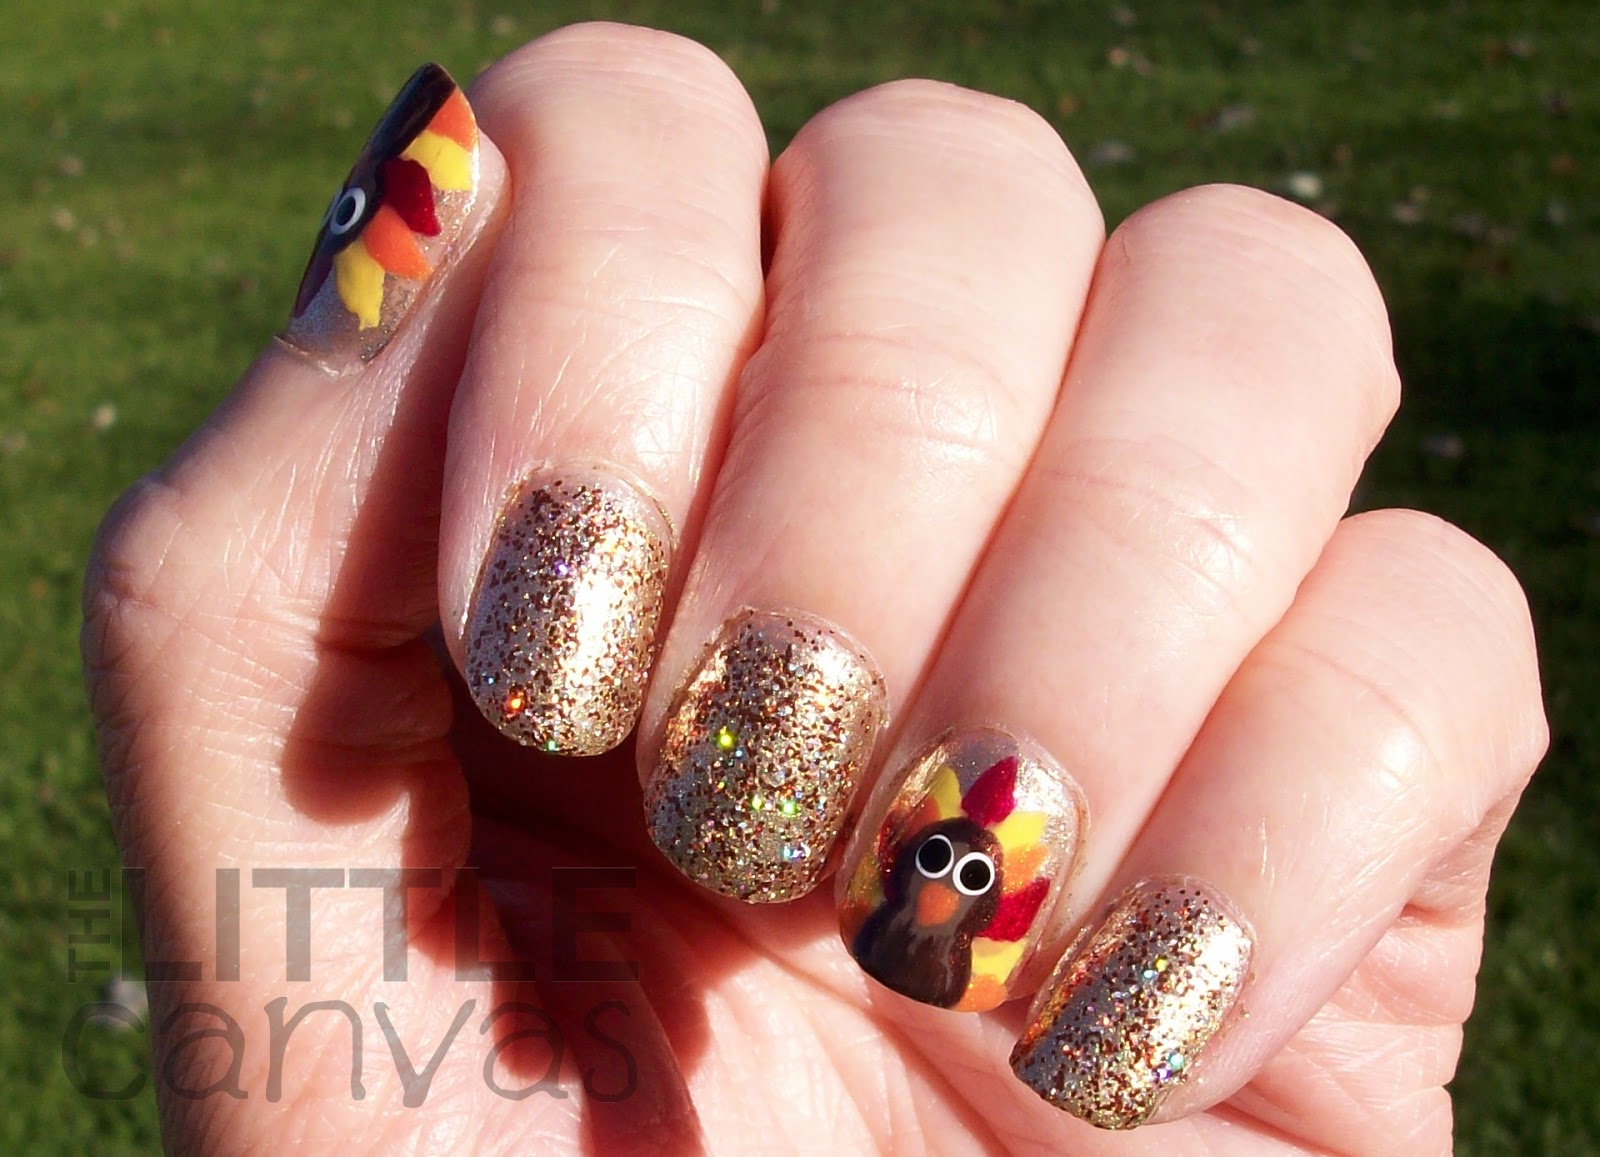 4. "Easy Thanksgiving Nail Art with Basic Shades" - wide 6